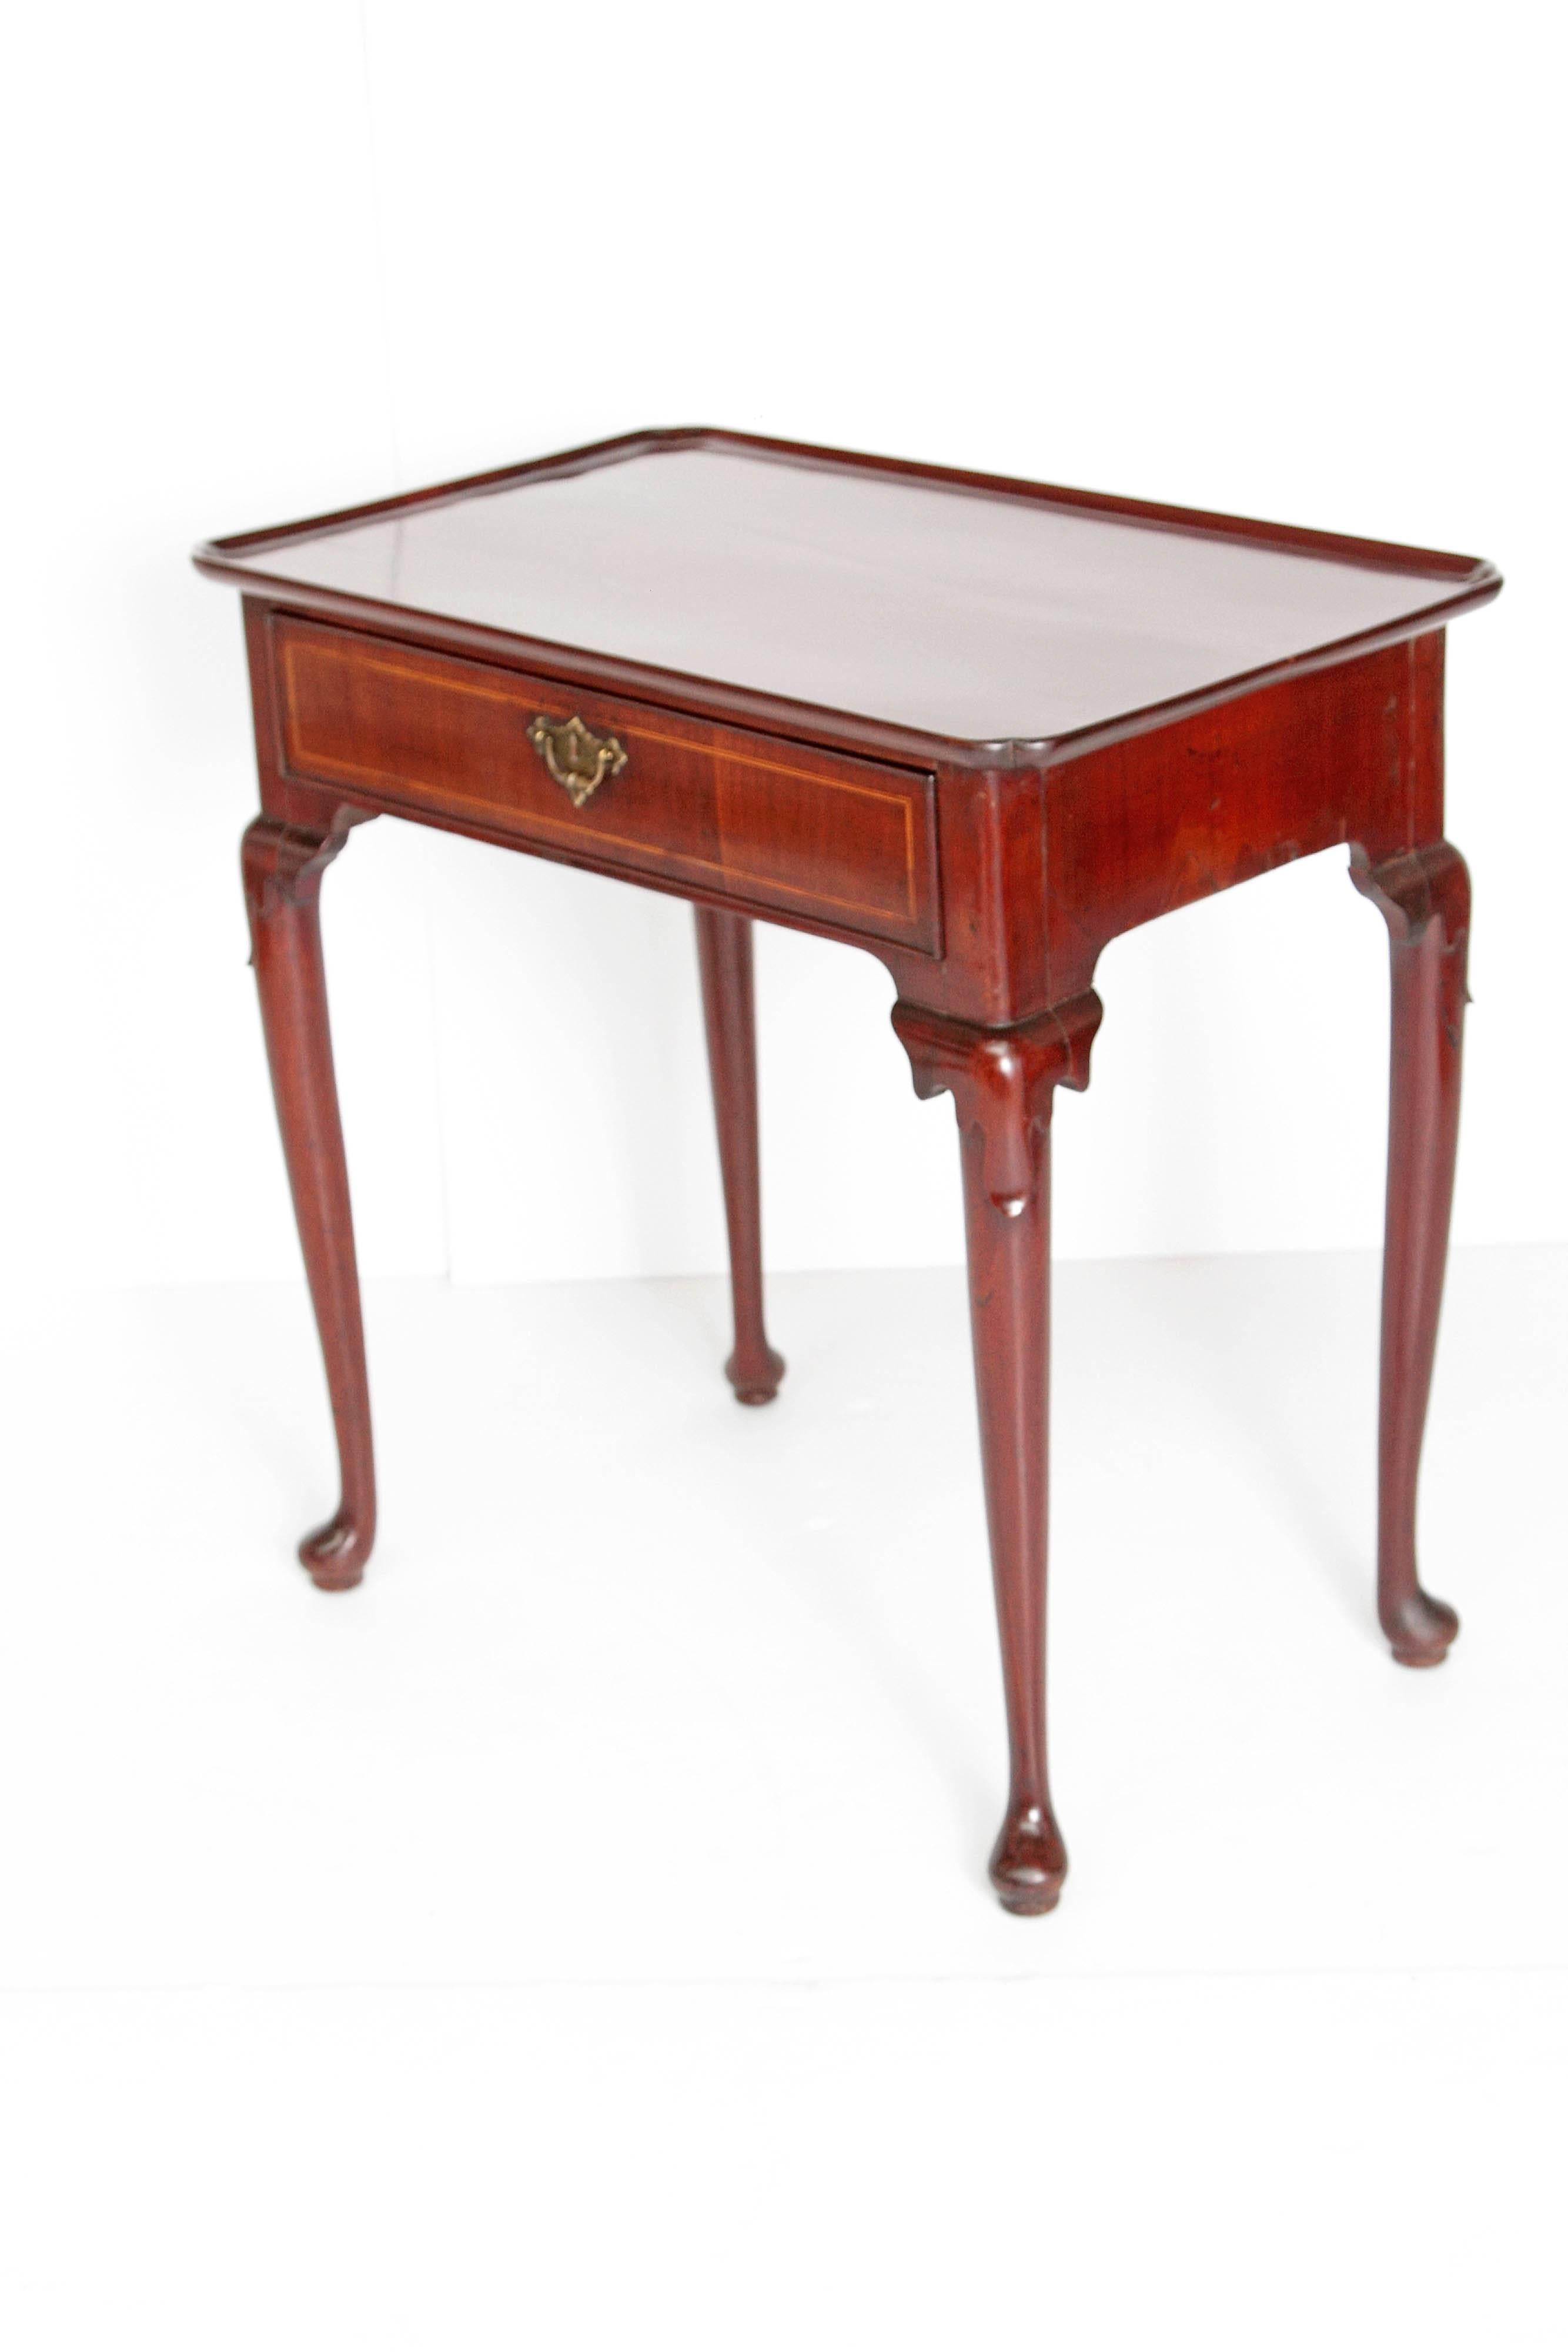 A George II English dressing table in walnut with inlaid border on drawer front. Single drawer with decorative pull on escutcheon. Cabriole legs with carving at knee and pad foot, circa 1740, England.